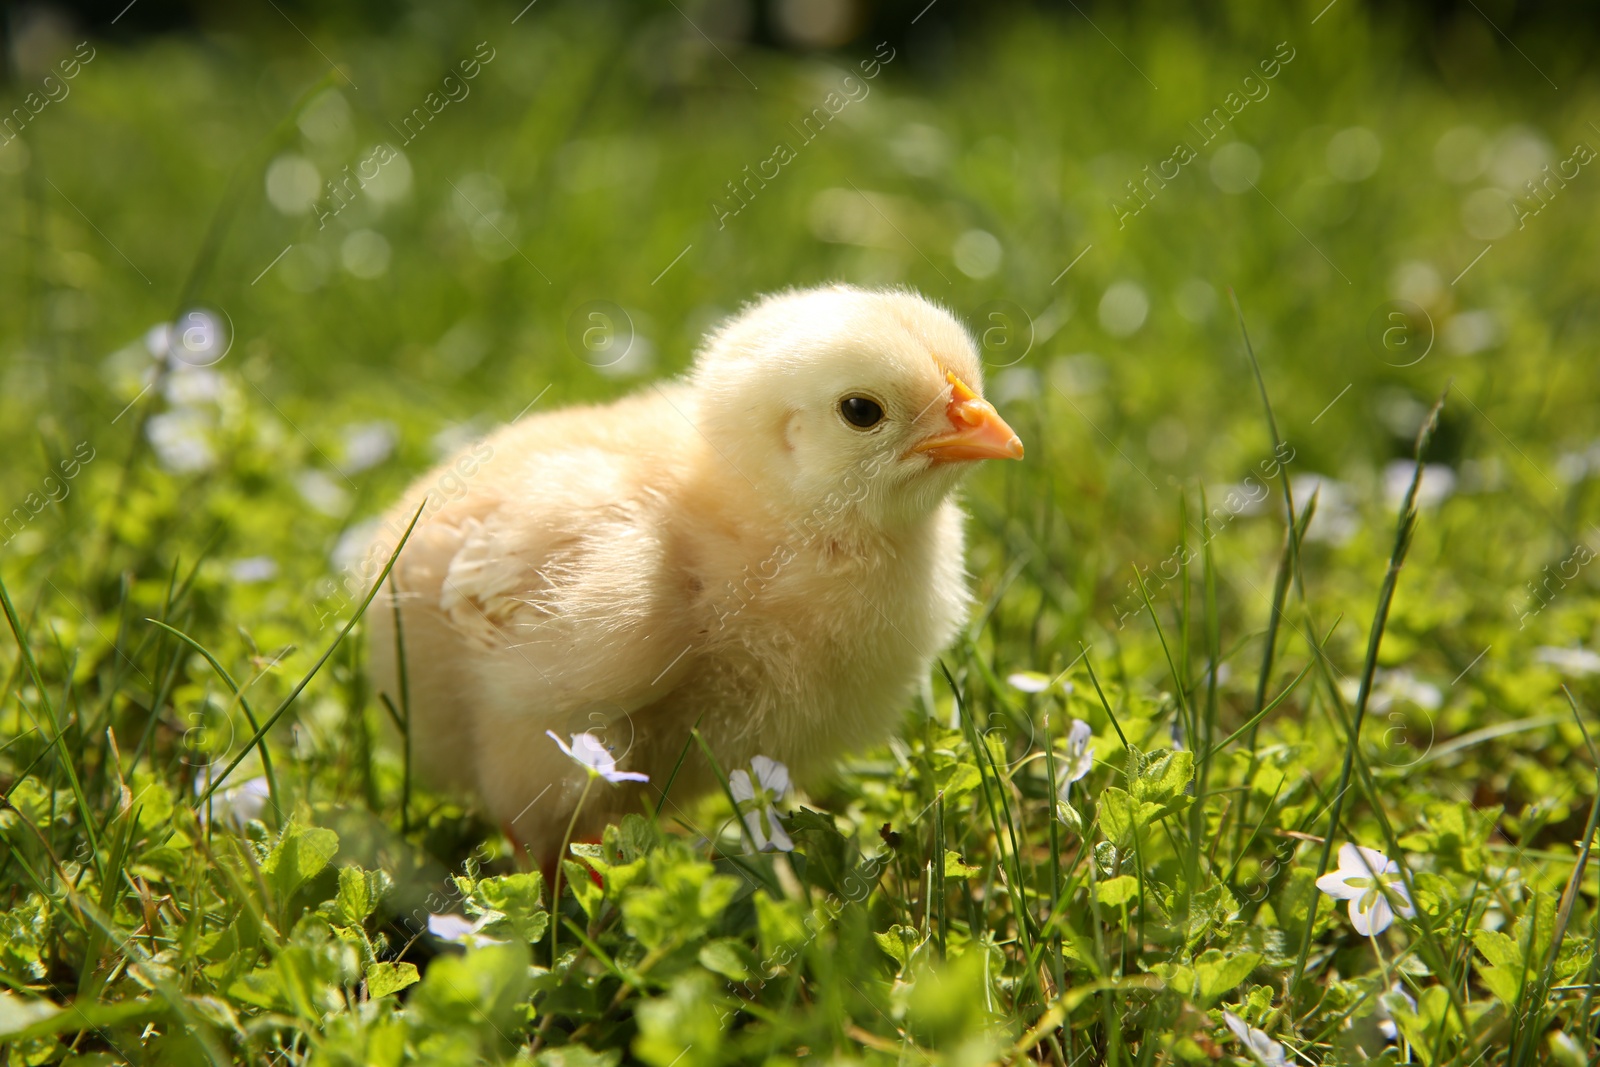 Photo of Cute chick on green grass outdoors, closeup. Baby animal